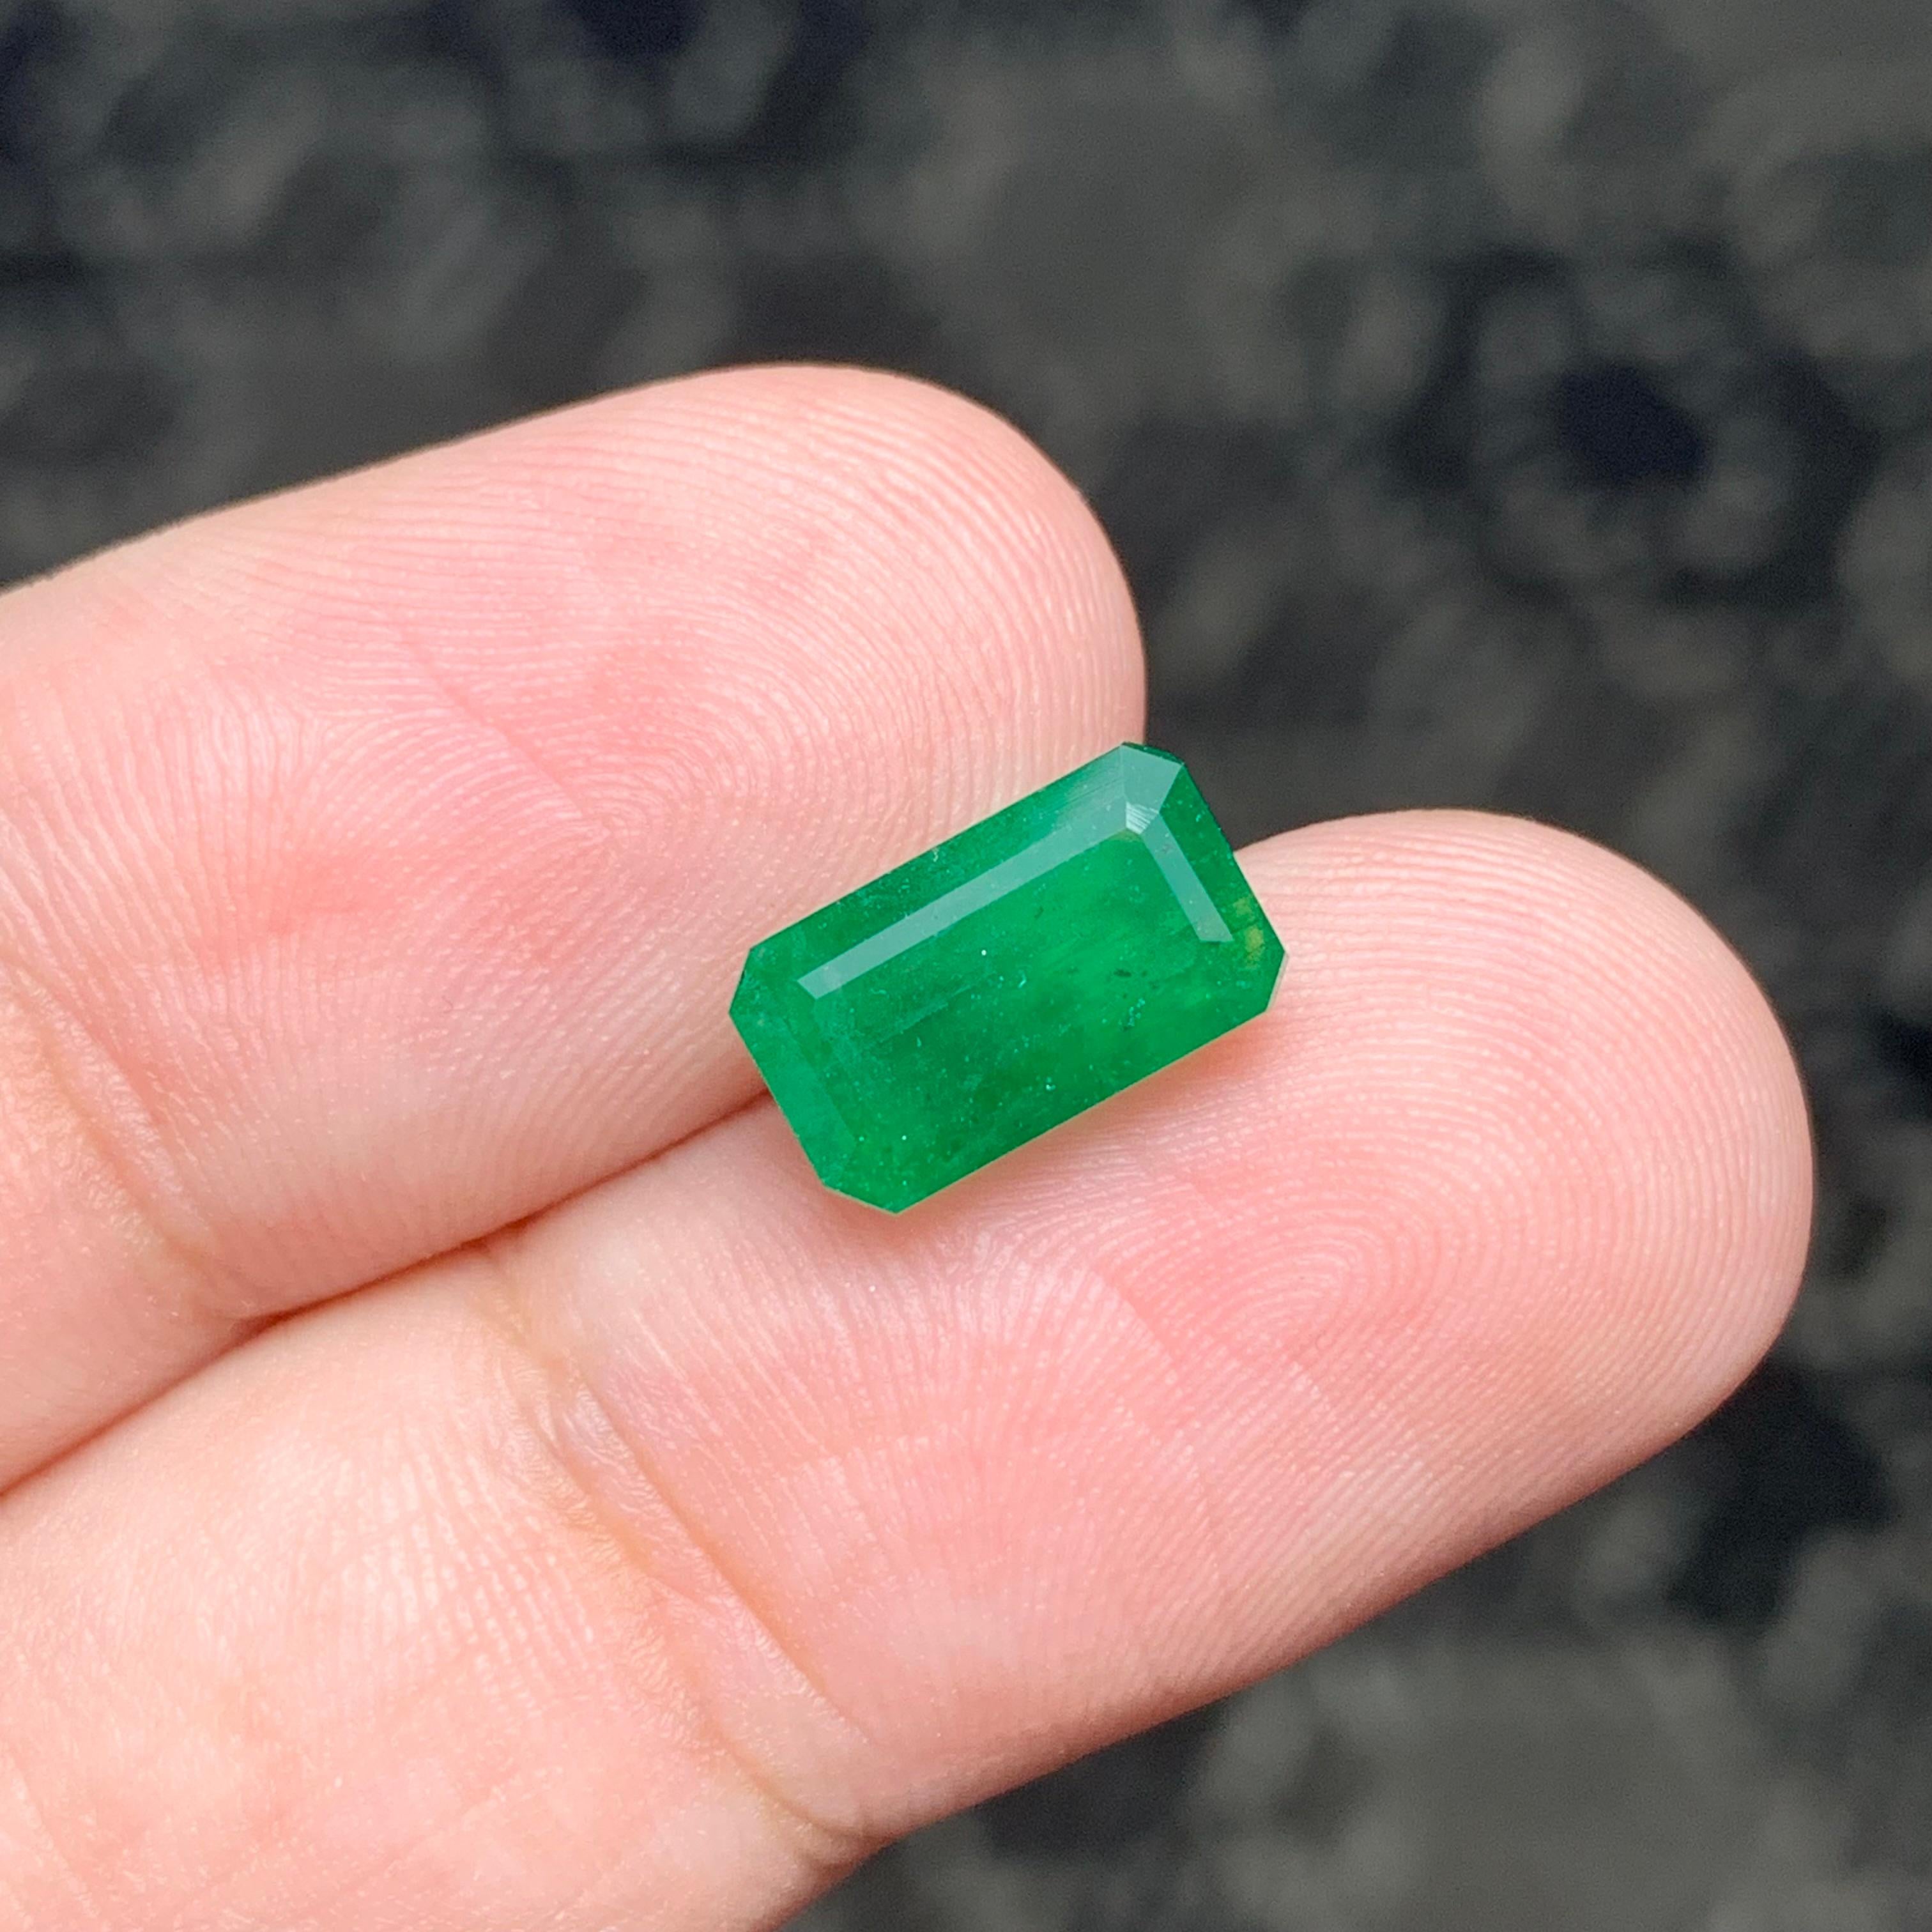 Loose Emerald 
Weight: 3.05 Carats 
Dimensions: 10.5x6.2x5.9 Mm
Origin: Swat Pakistan 
Shape: Emerald 
Color: Green
Treatment: Non 
Certificate: On Demand 
The Swat Emerald, also known as the Mingora Emerald, is a rare and highly prized gemstone